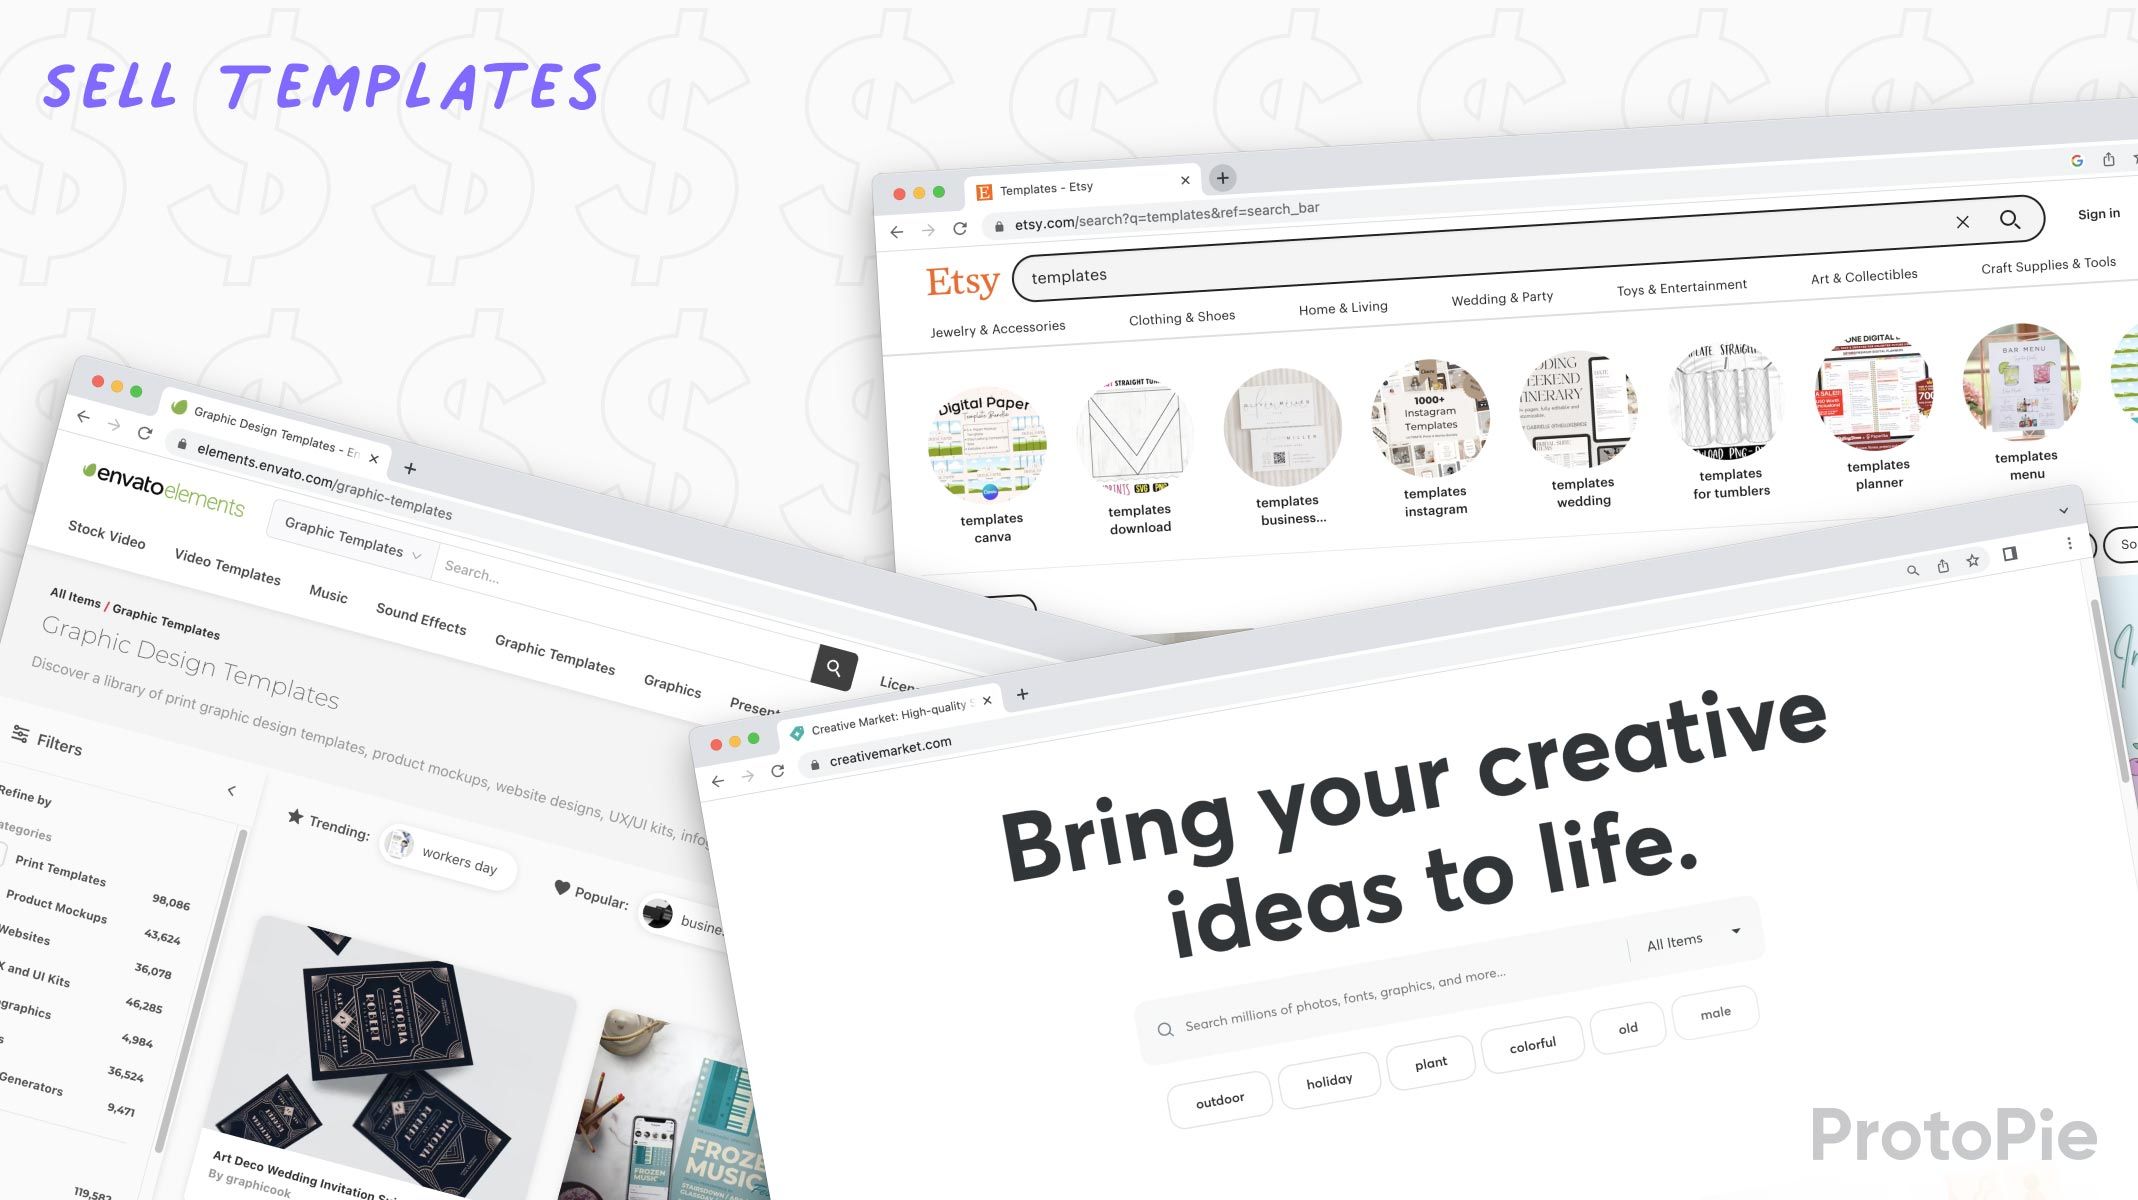 screenshots from platforms envato, etsy, and creative market